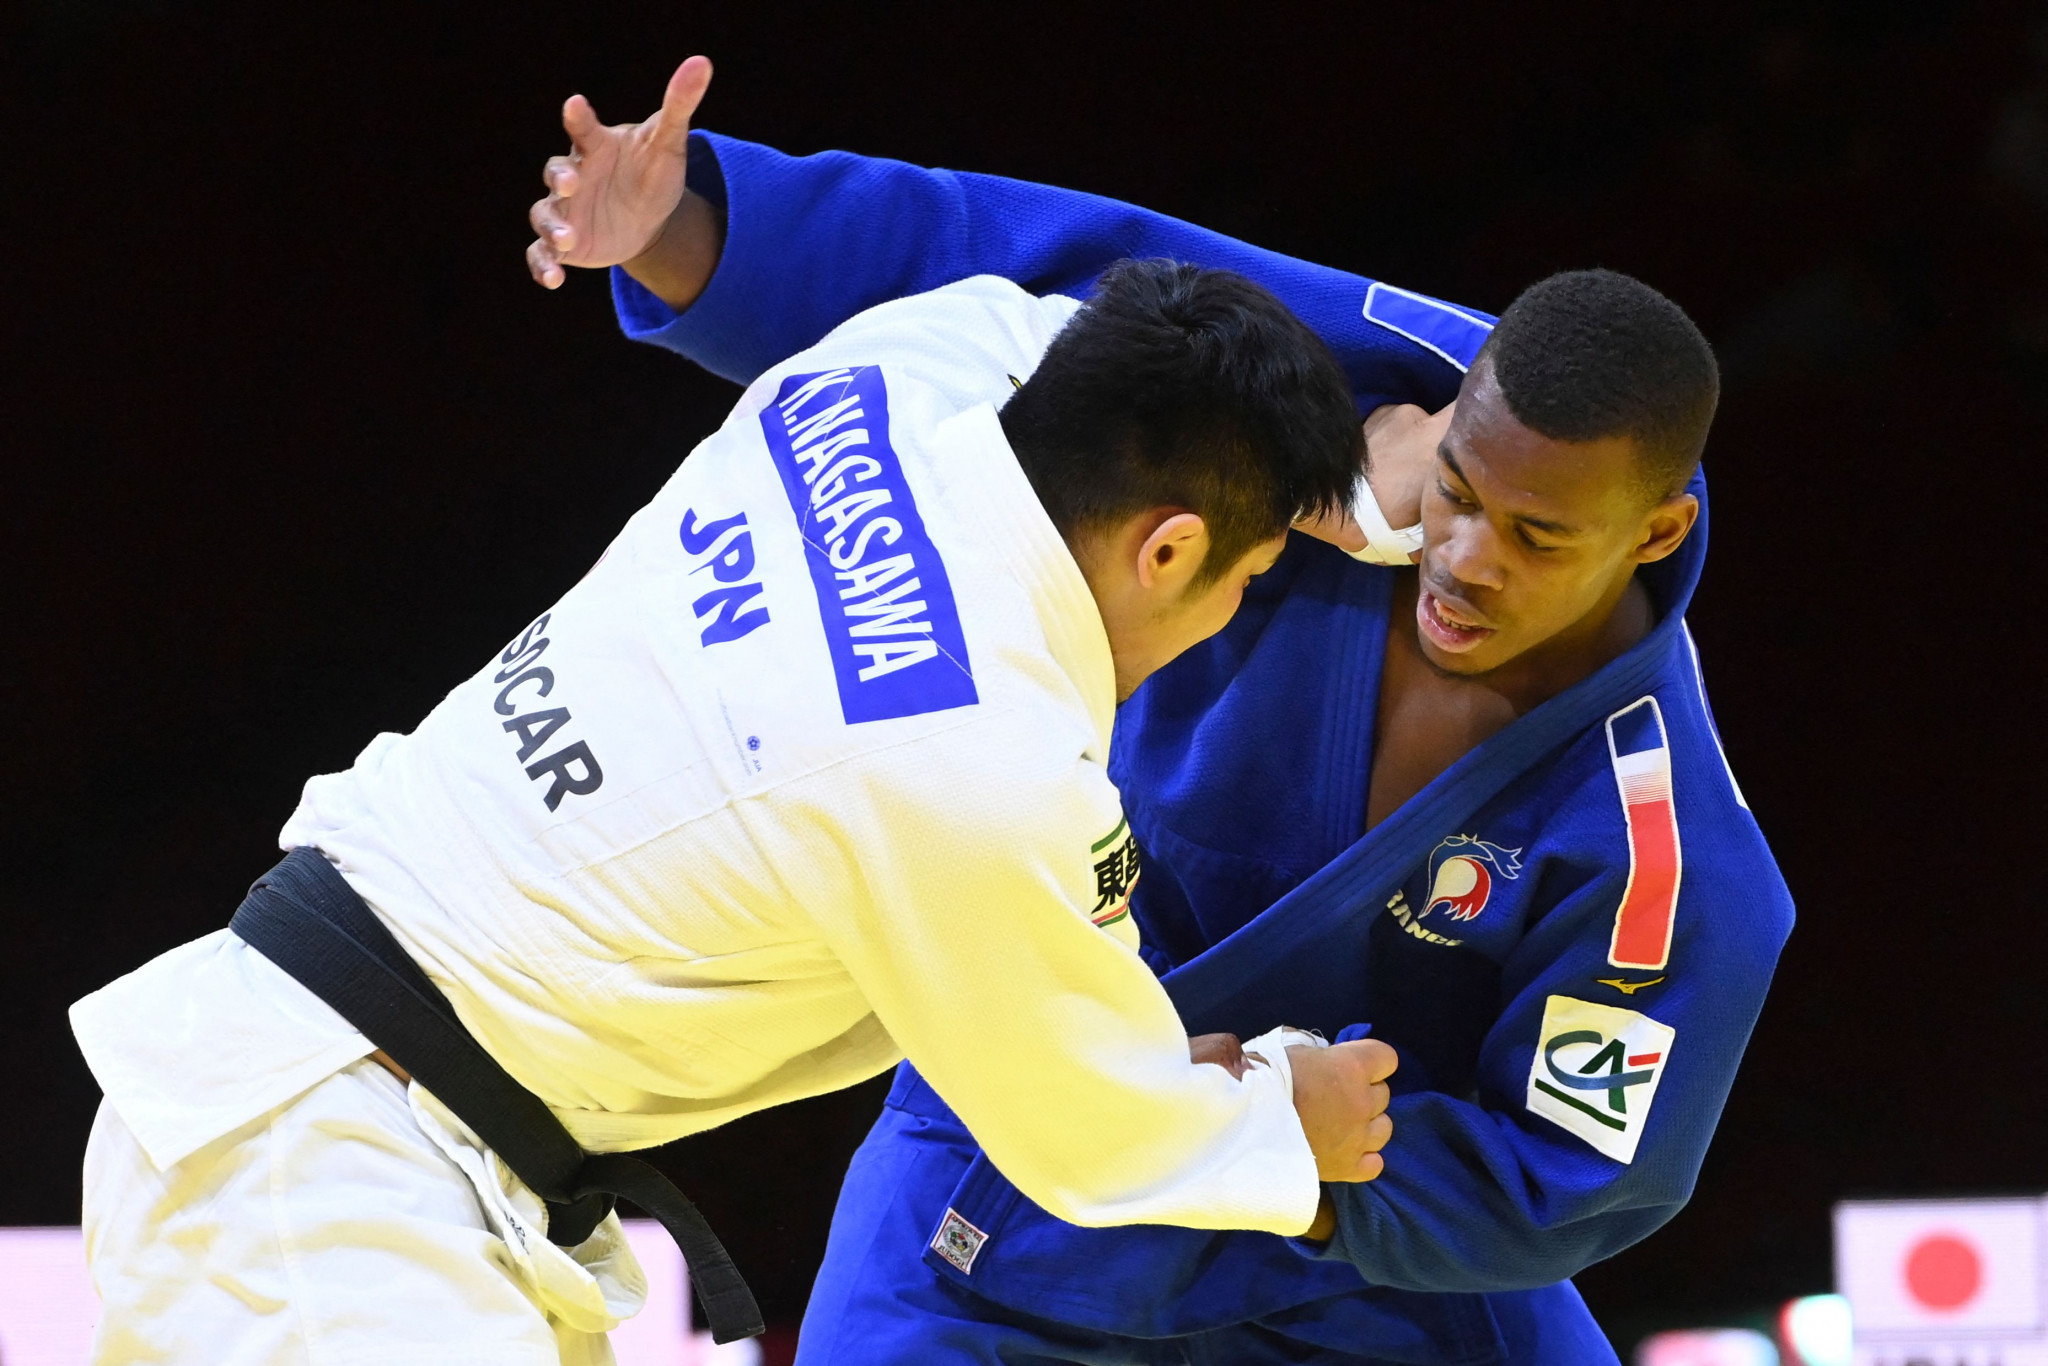 Japan's Kenta Nagasawa, left, came out on top during a close contest with France's Francis Damier, right ©Getty Images